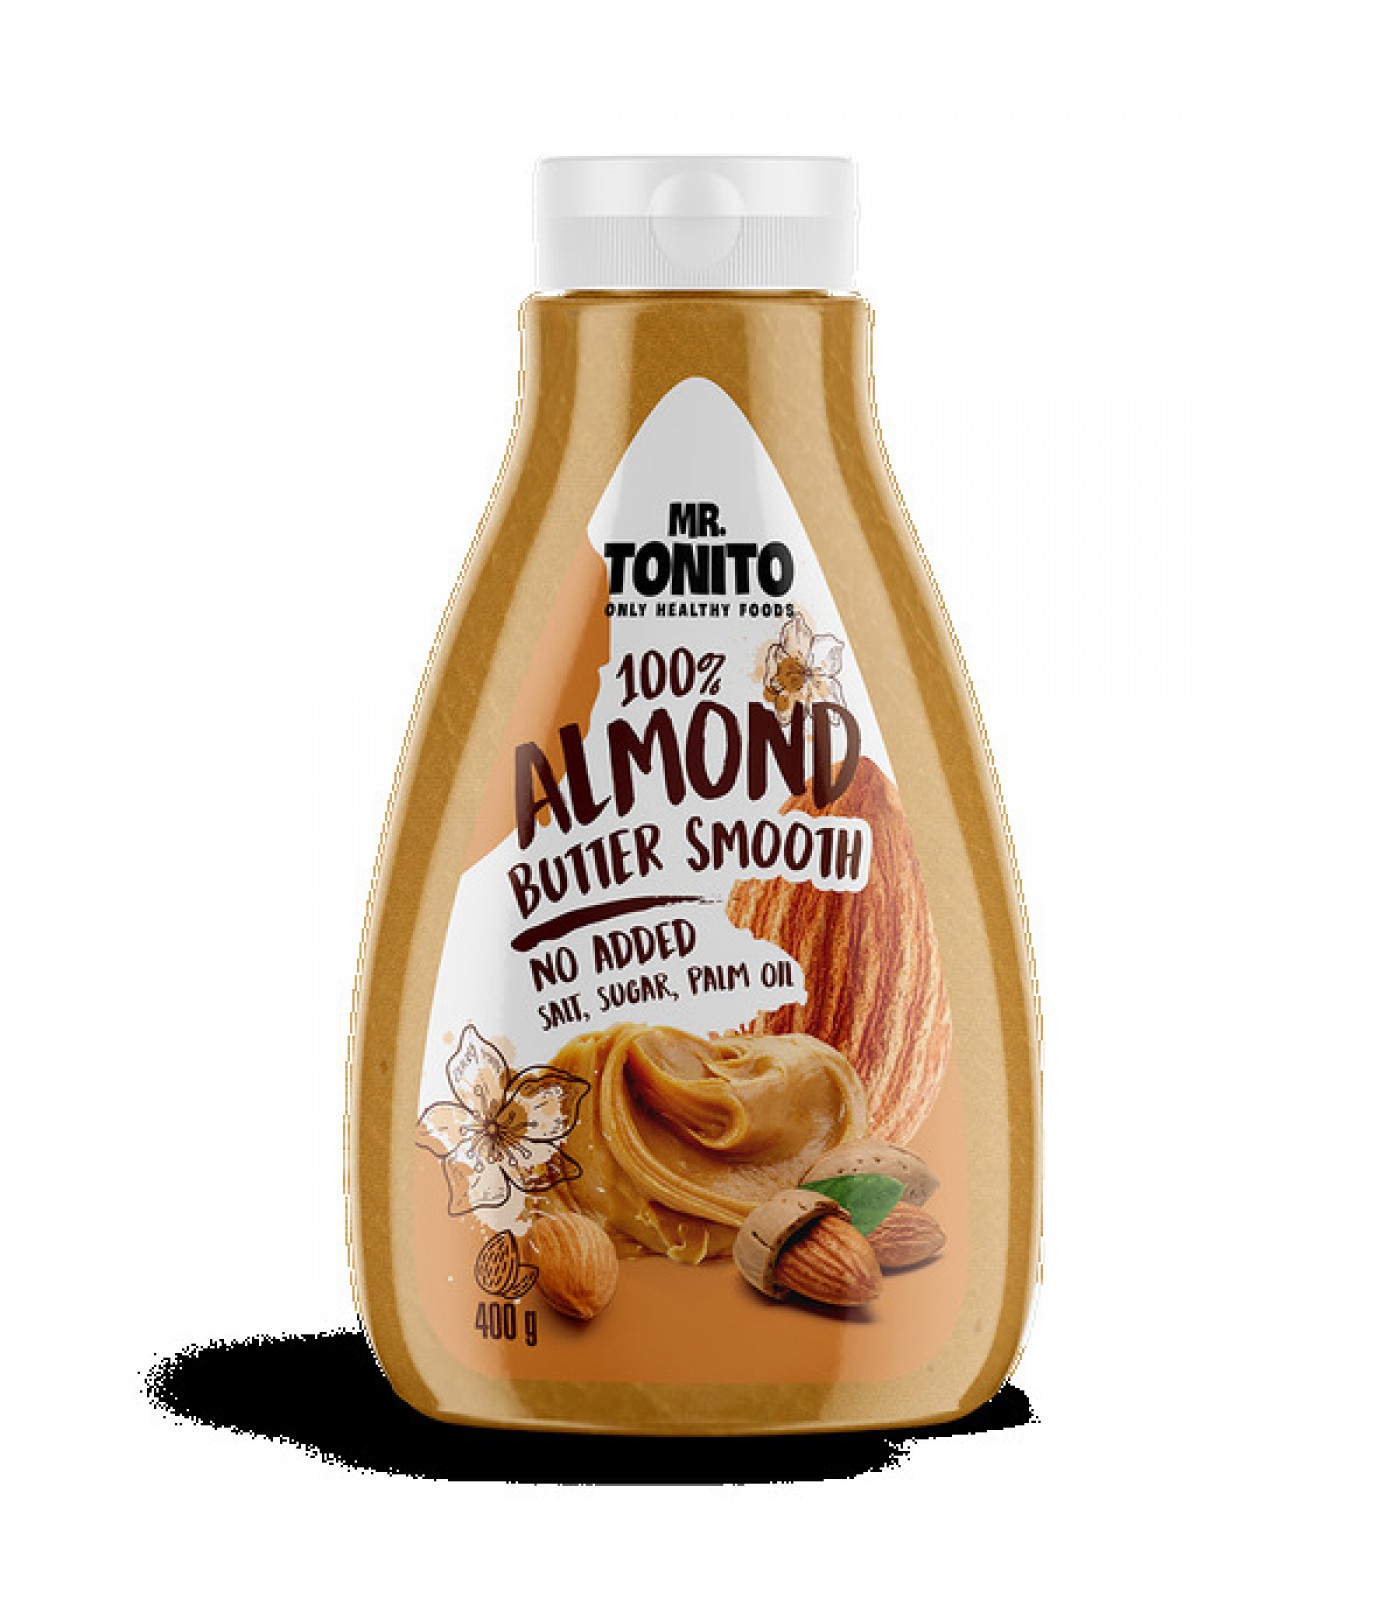 OstroVit - Mr. Tonito / Almond Butter Smooth / 400gr.